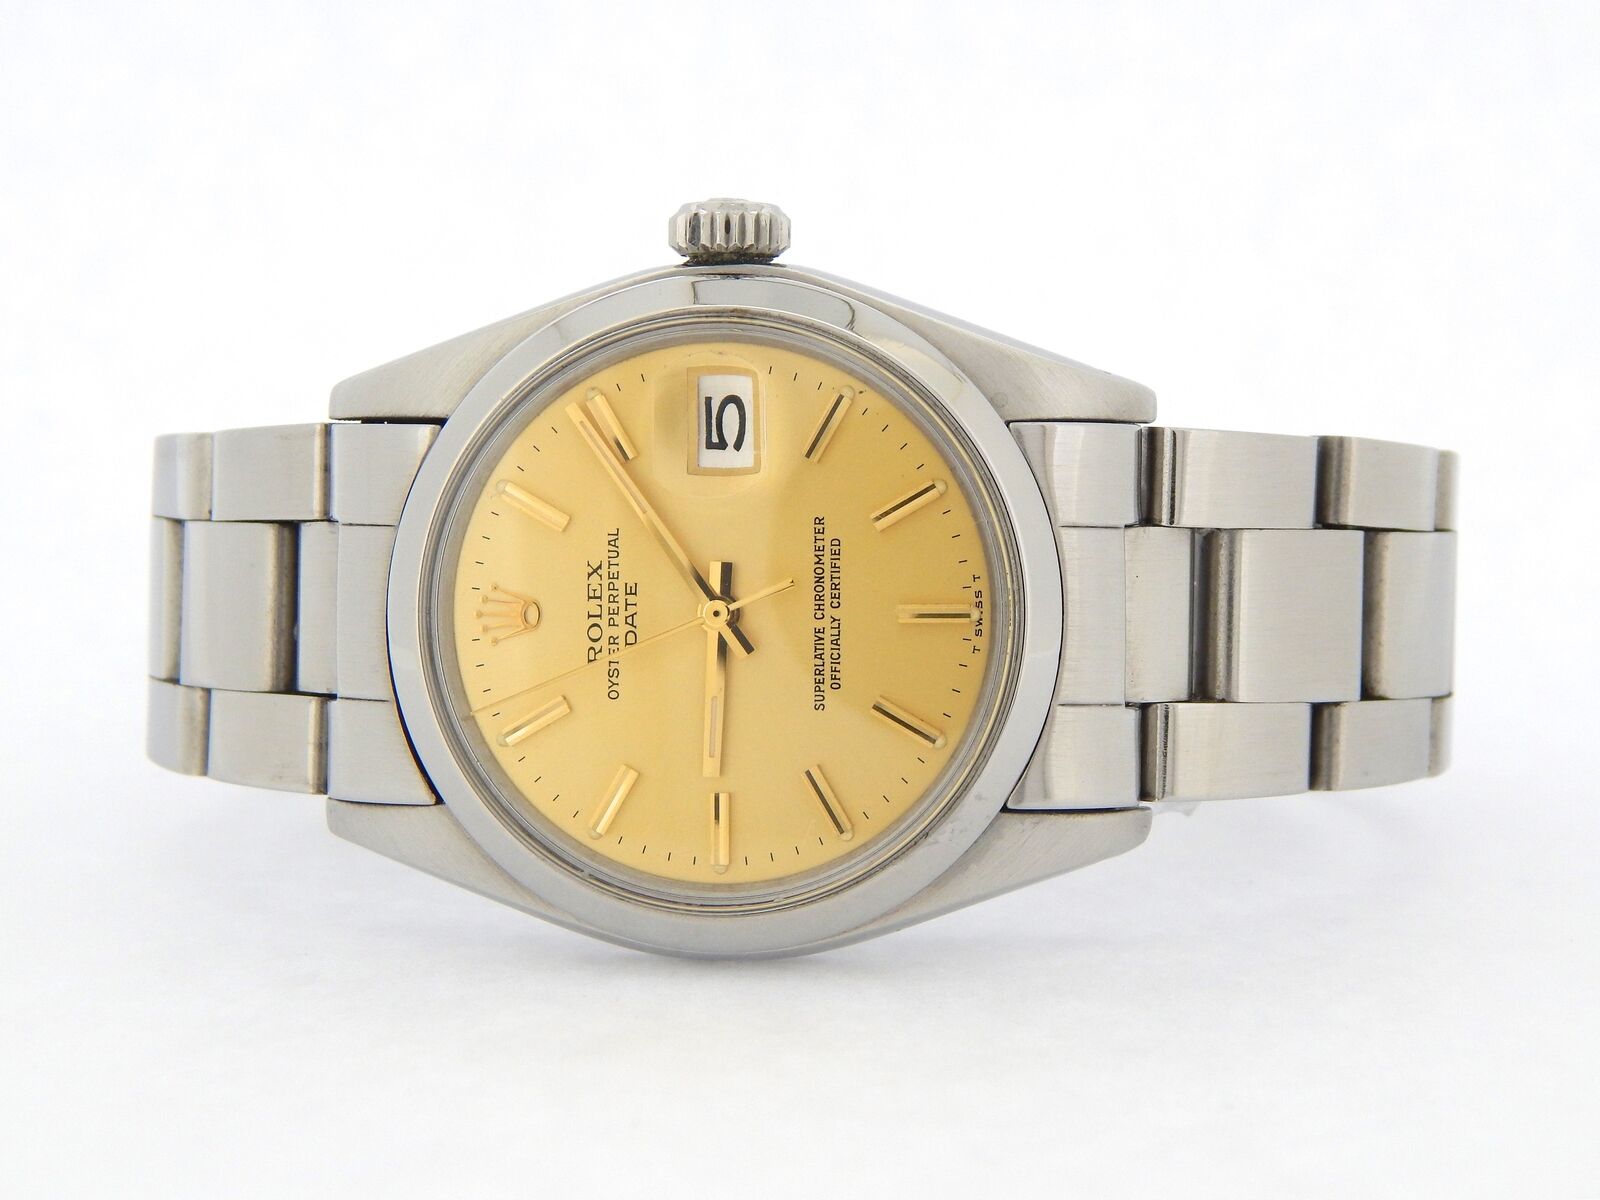 Rolex Oyster Perpetual Date Golden Dial del Barhain Rarissimo!